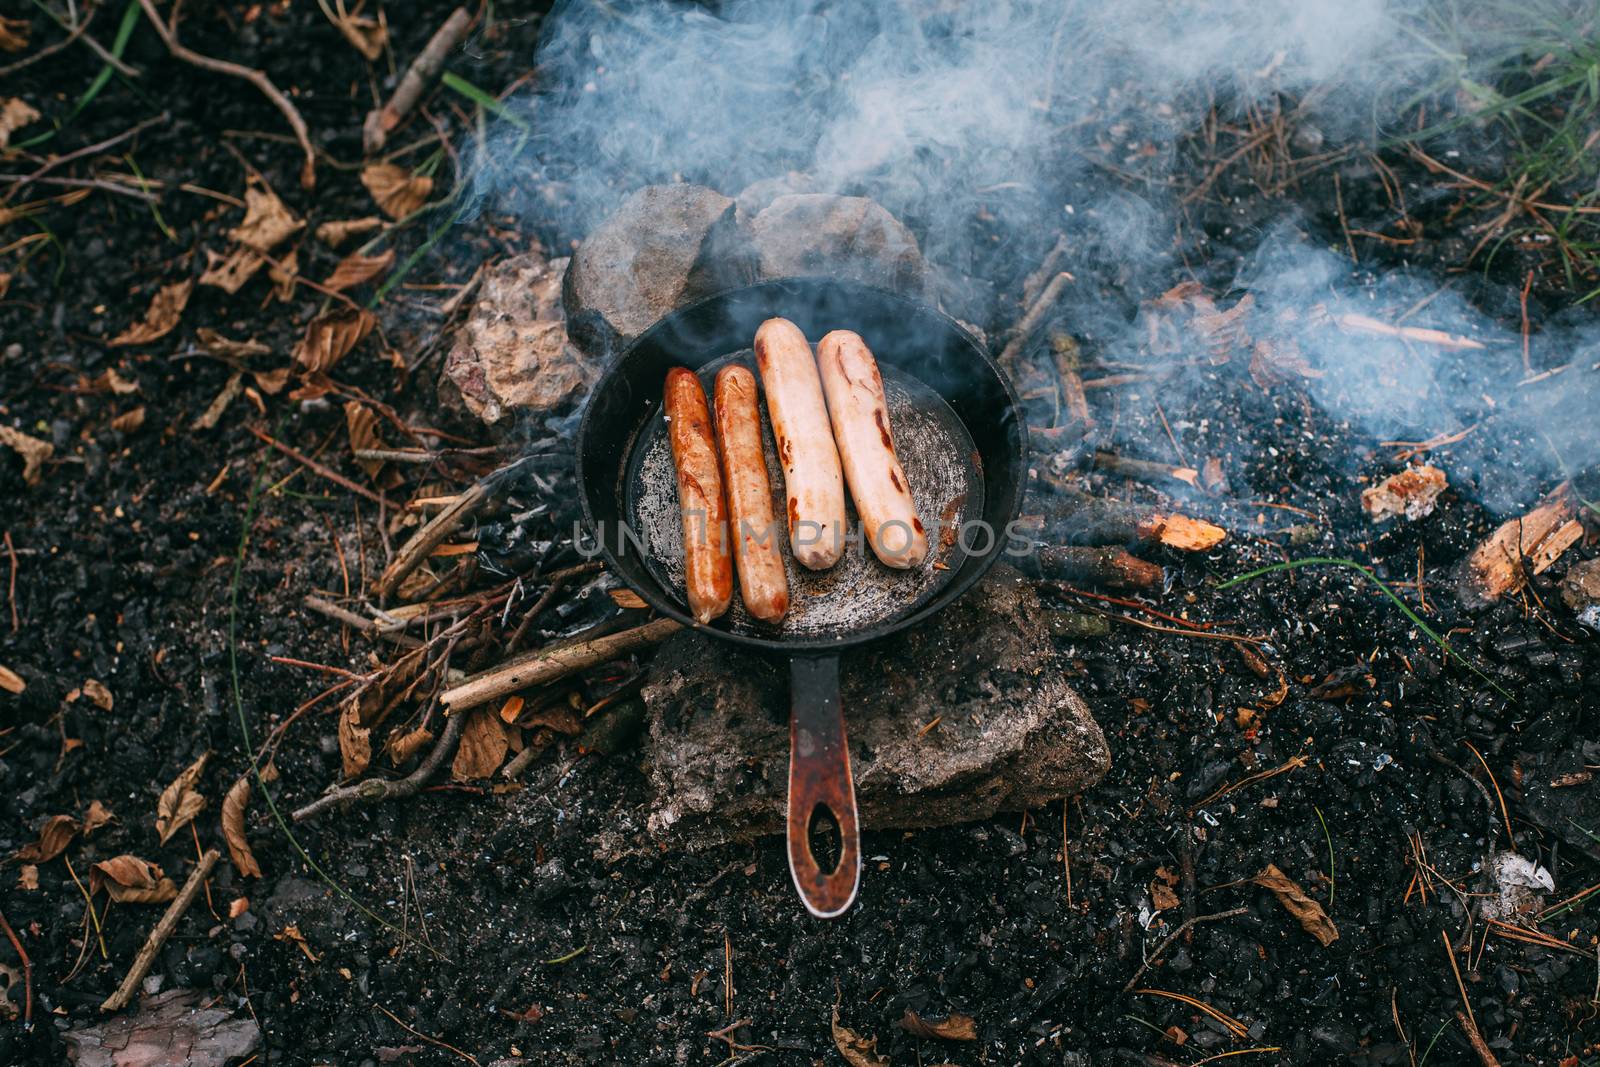 Roasting sausages in a frying pan over an open fire. Preparing food in nature. Lunch in the open air. Picnic in the forest. Food on fire